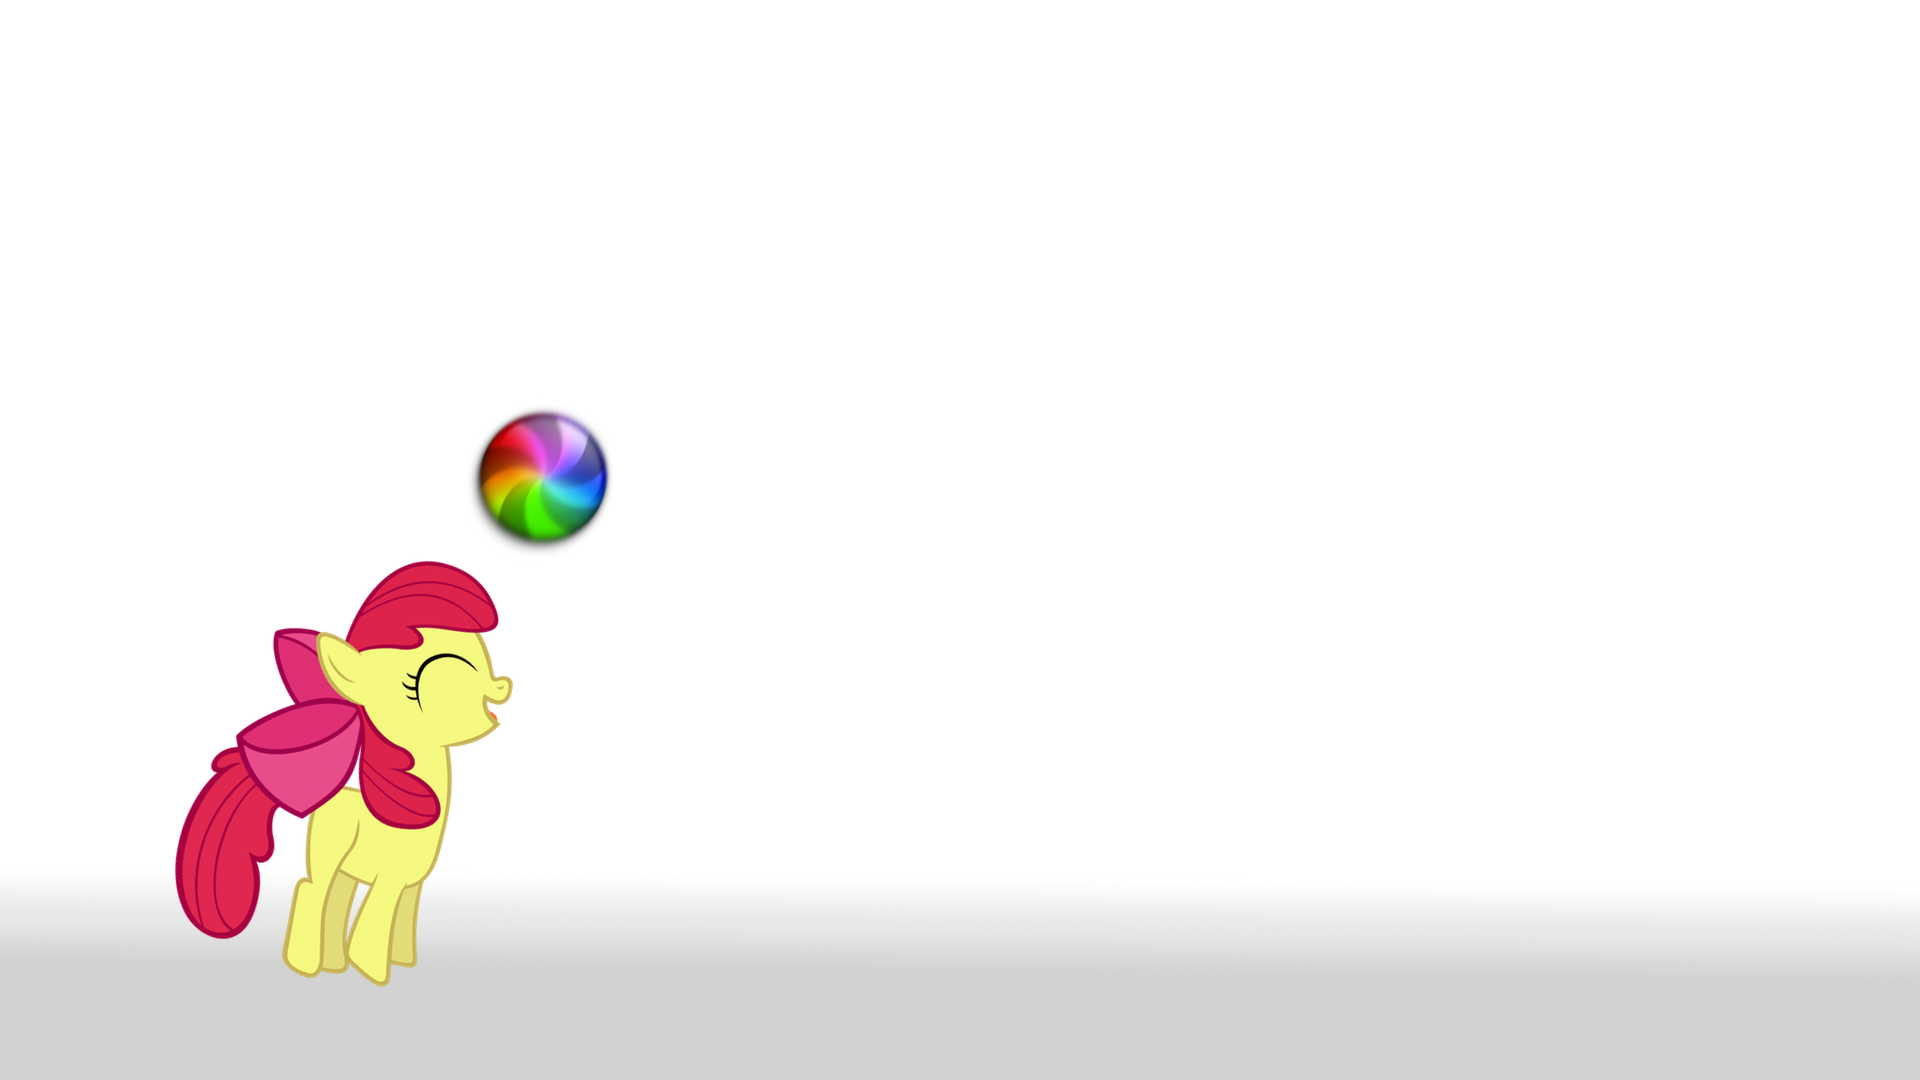 Apple Bloom Beach Ball WP by dtcx97 and Stabzor